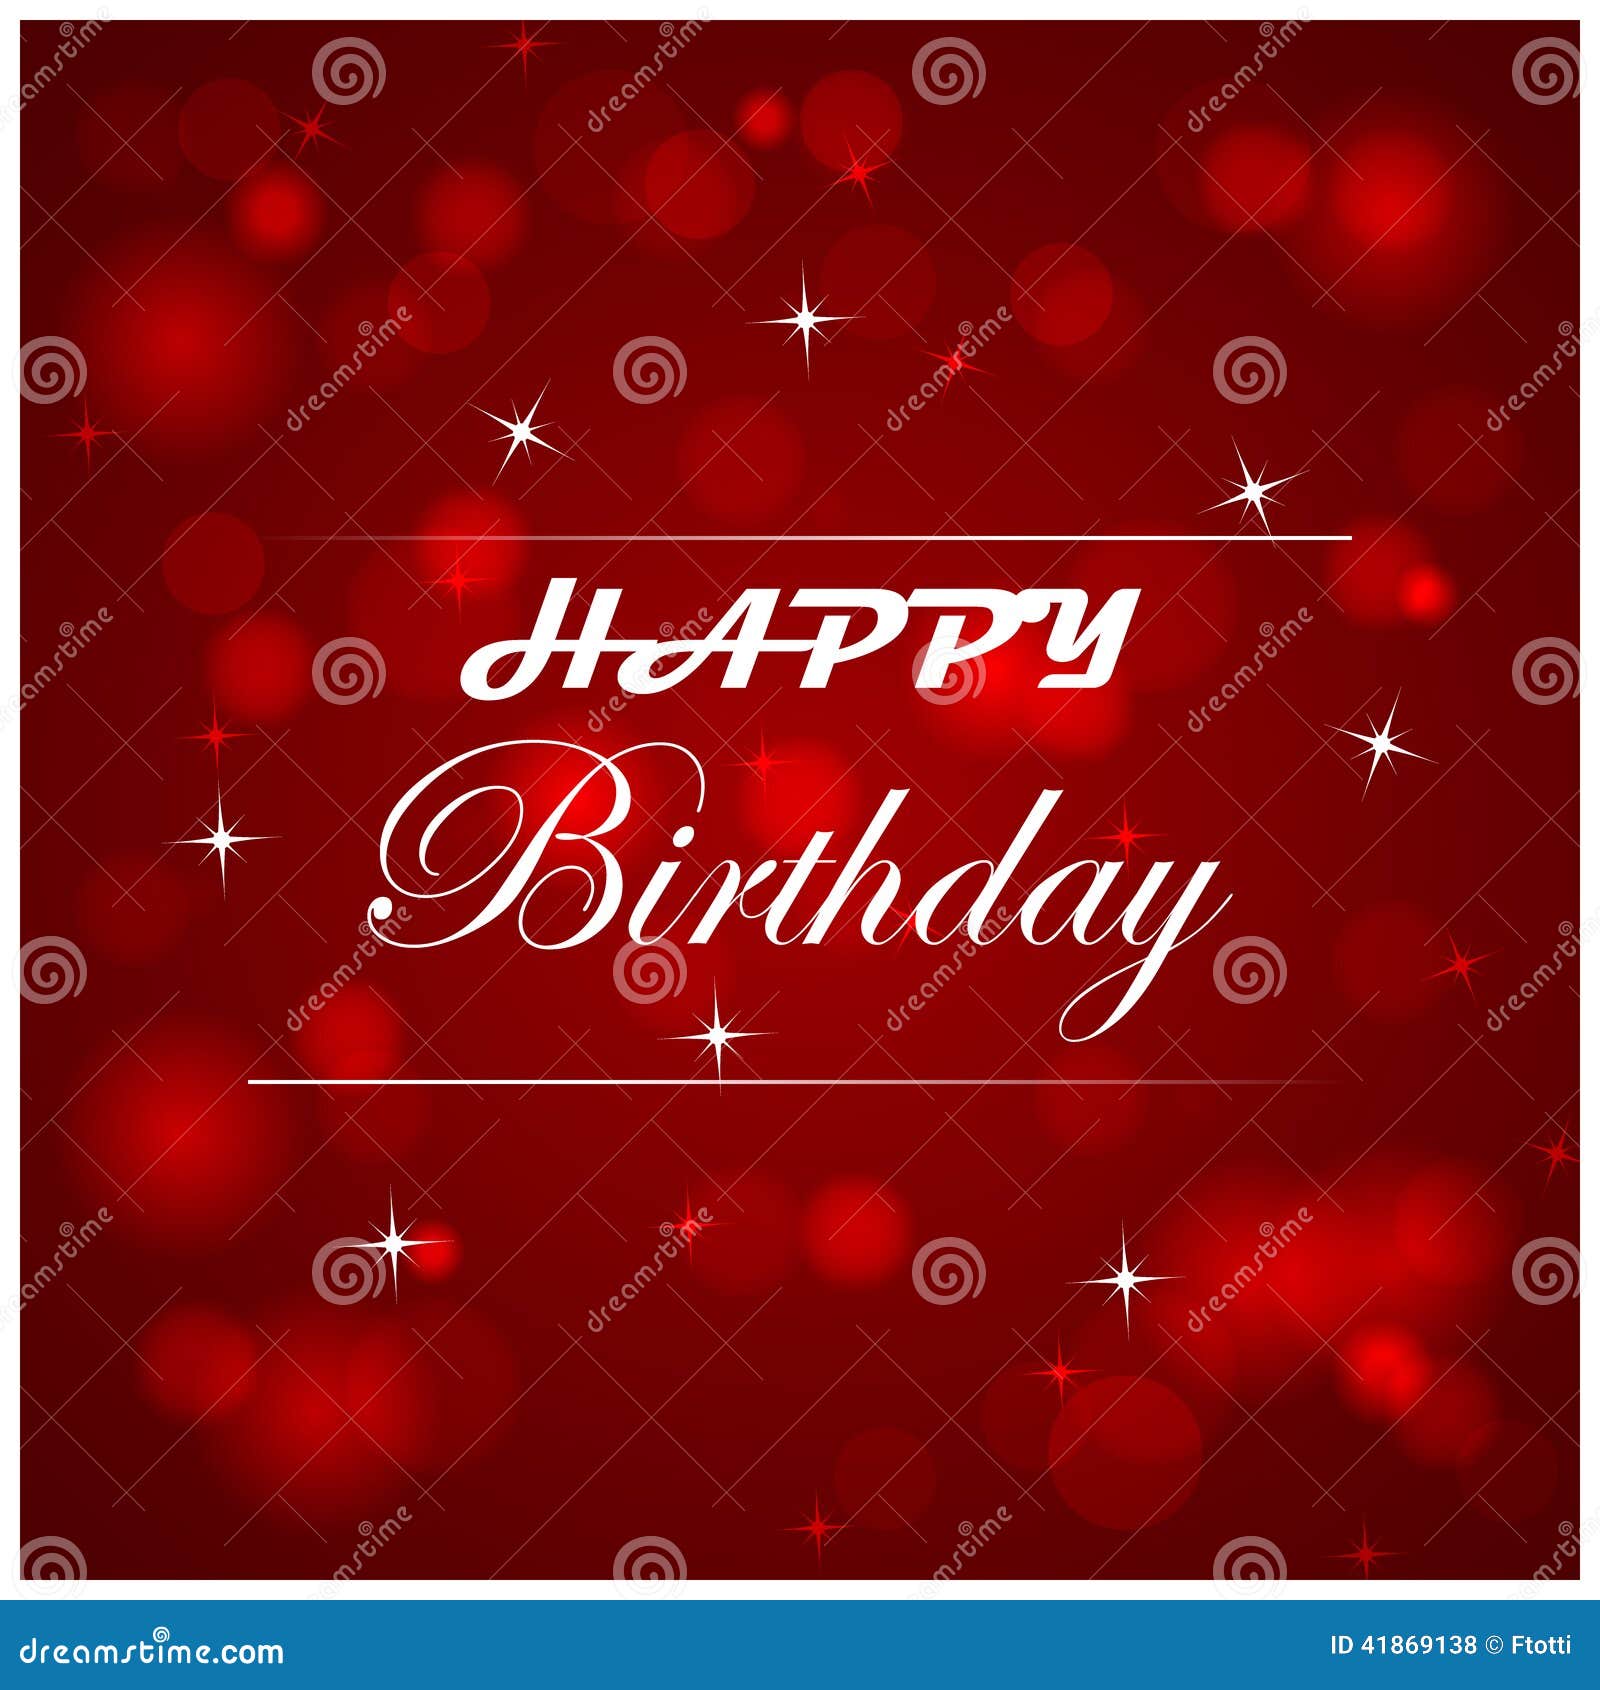 Happy Birthday Illustration with Light on the Background Stock Vector ...